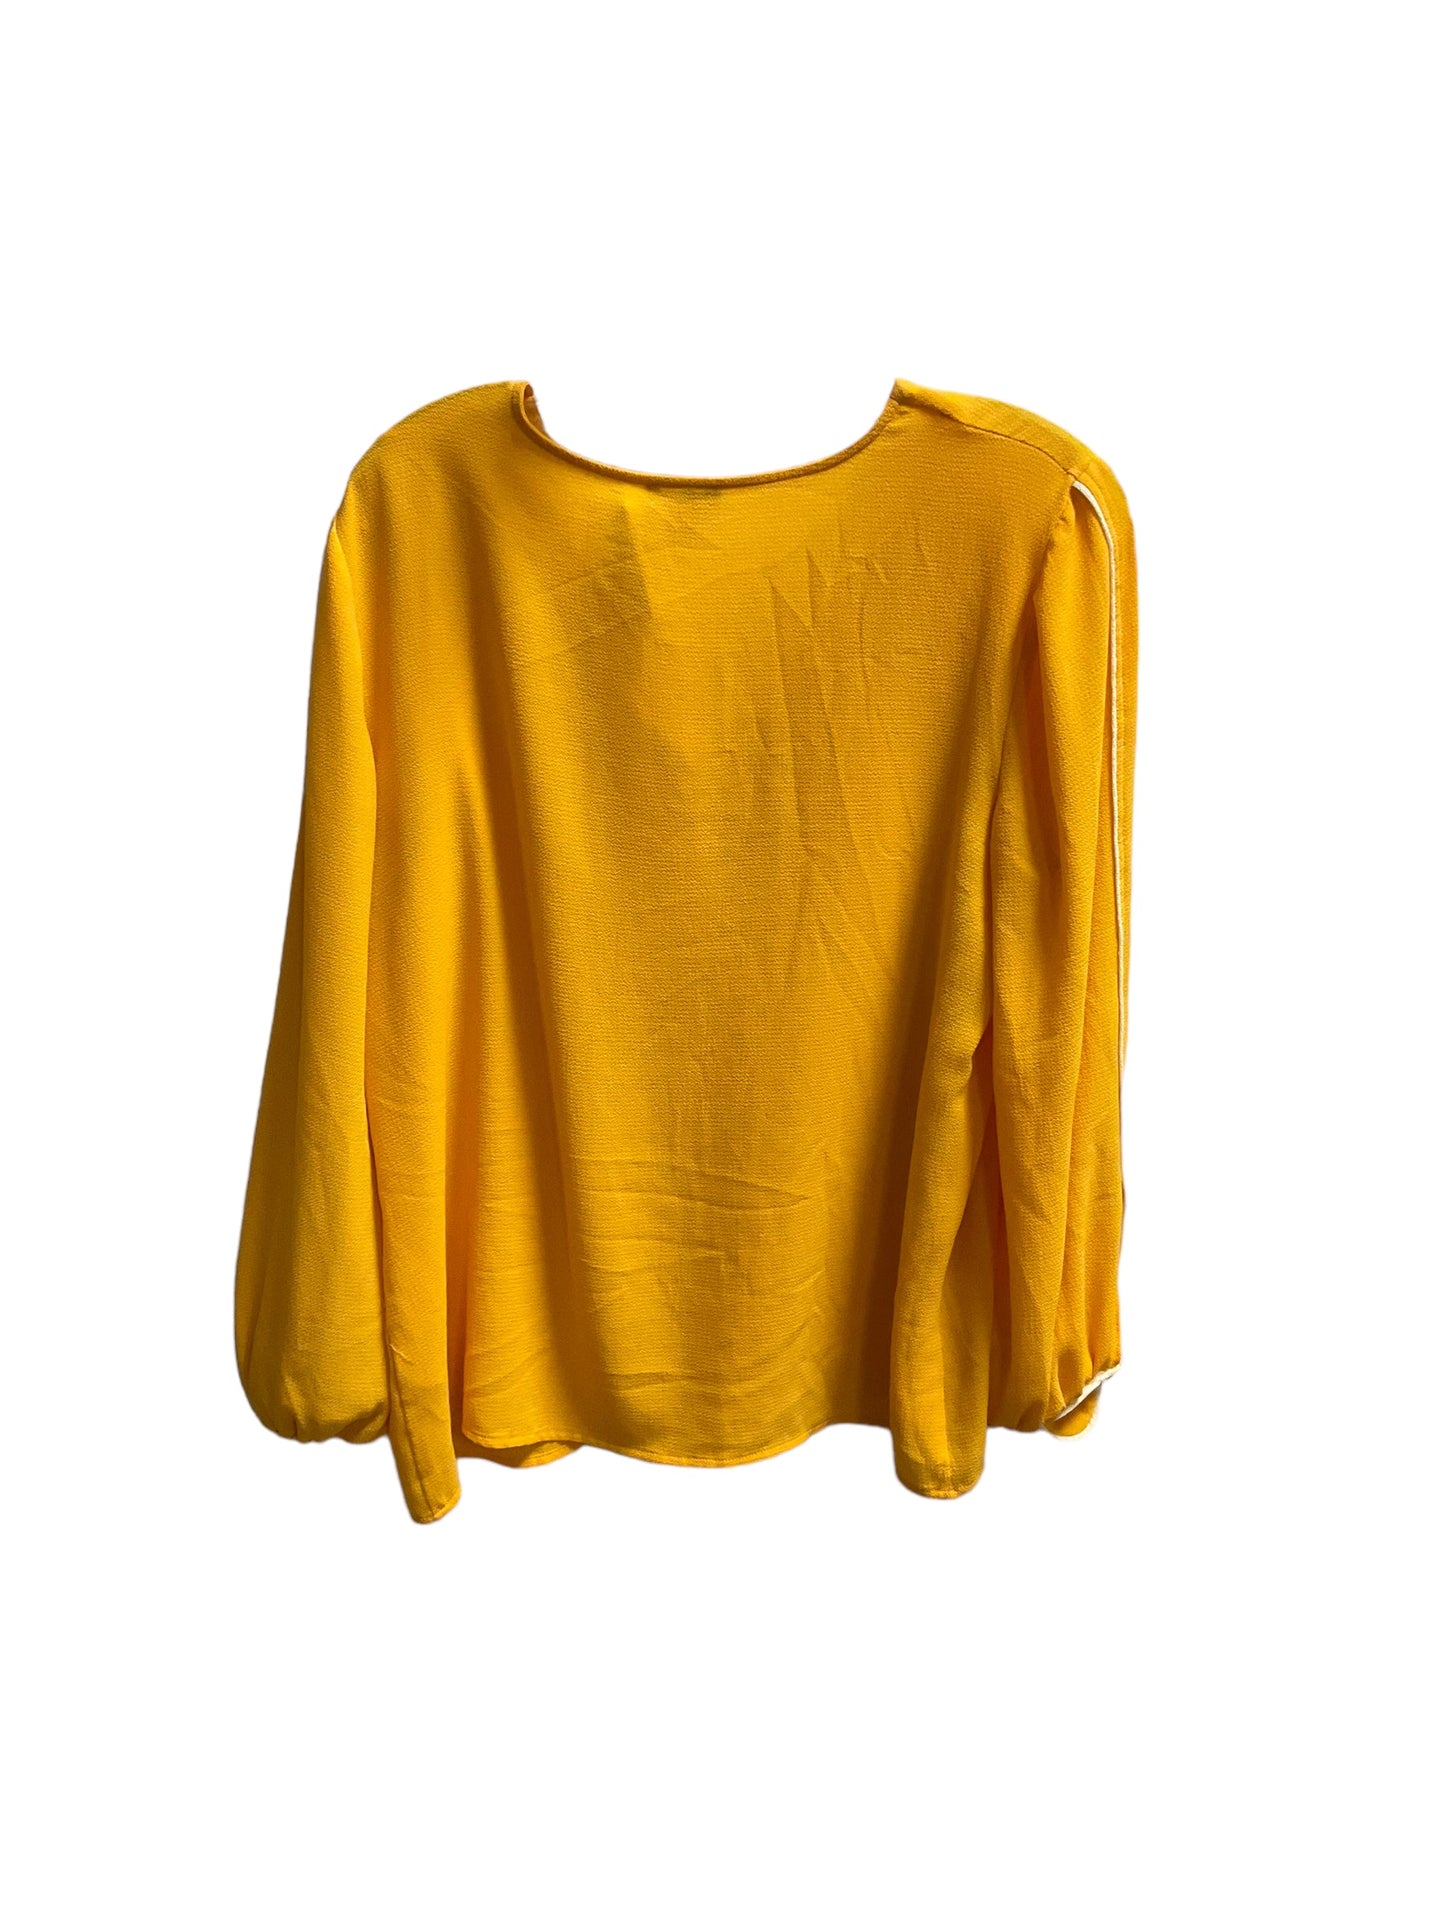 Yellow Top Long Sleeve Vince Camuto, Size M